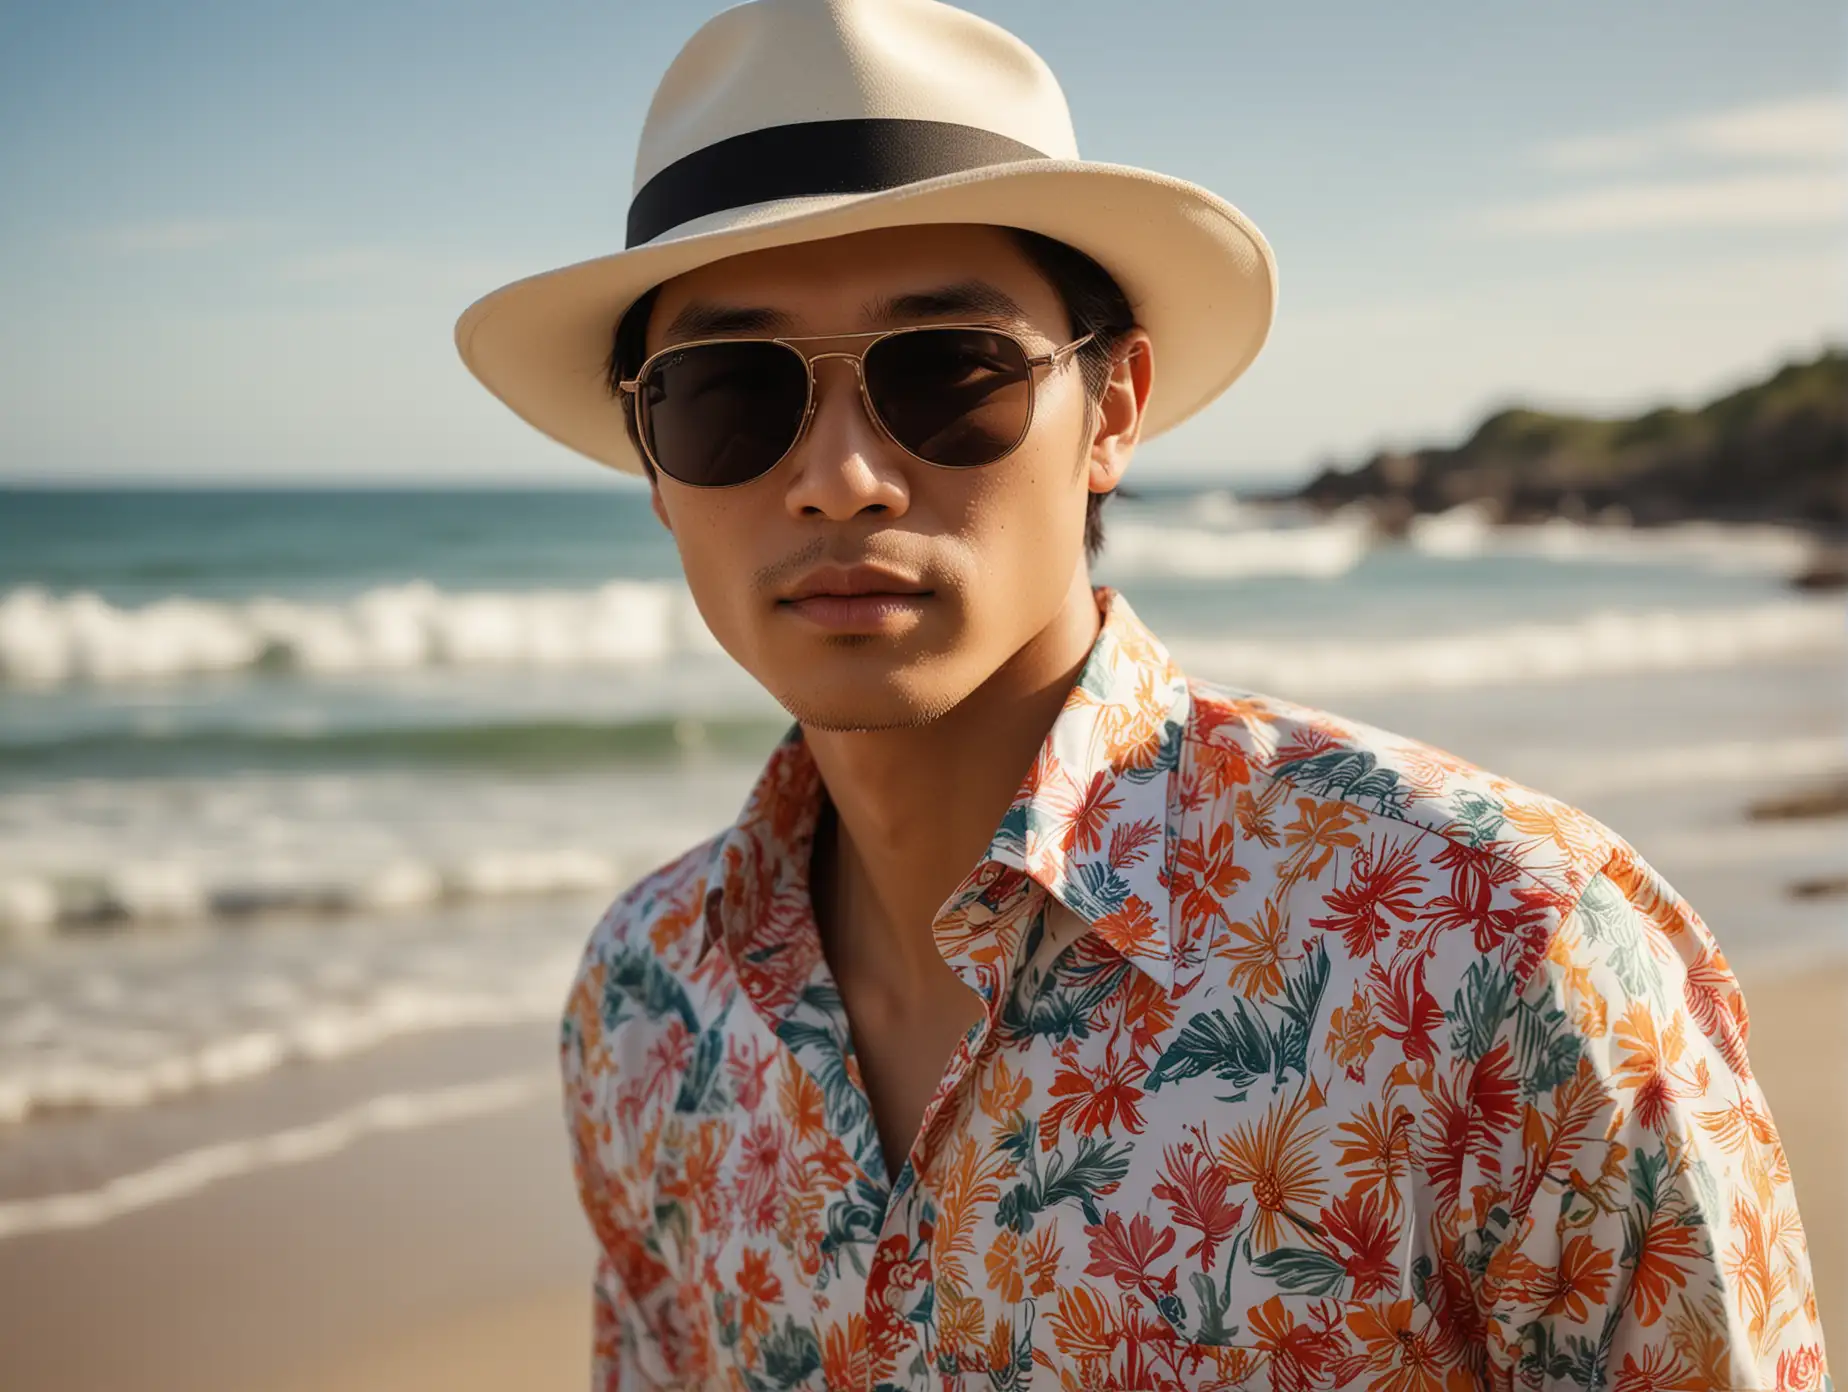 "a headshot portrait photograph captivating composition inspired by Annie Leibovitz's iconic style, showcasing a young asian man wears white fedora hat, beach hawai-motive colorful shirt, walking gracefully on the sandy shores of a sun-drenched beach. With the Sigma 85mm 1.4F lens, capture him delicately holding his sunglasses with his fingers, adding an element of contemplation to the scene against the backdrop of the serene ocean waves."